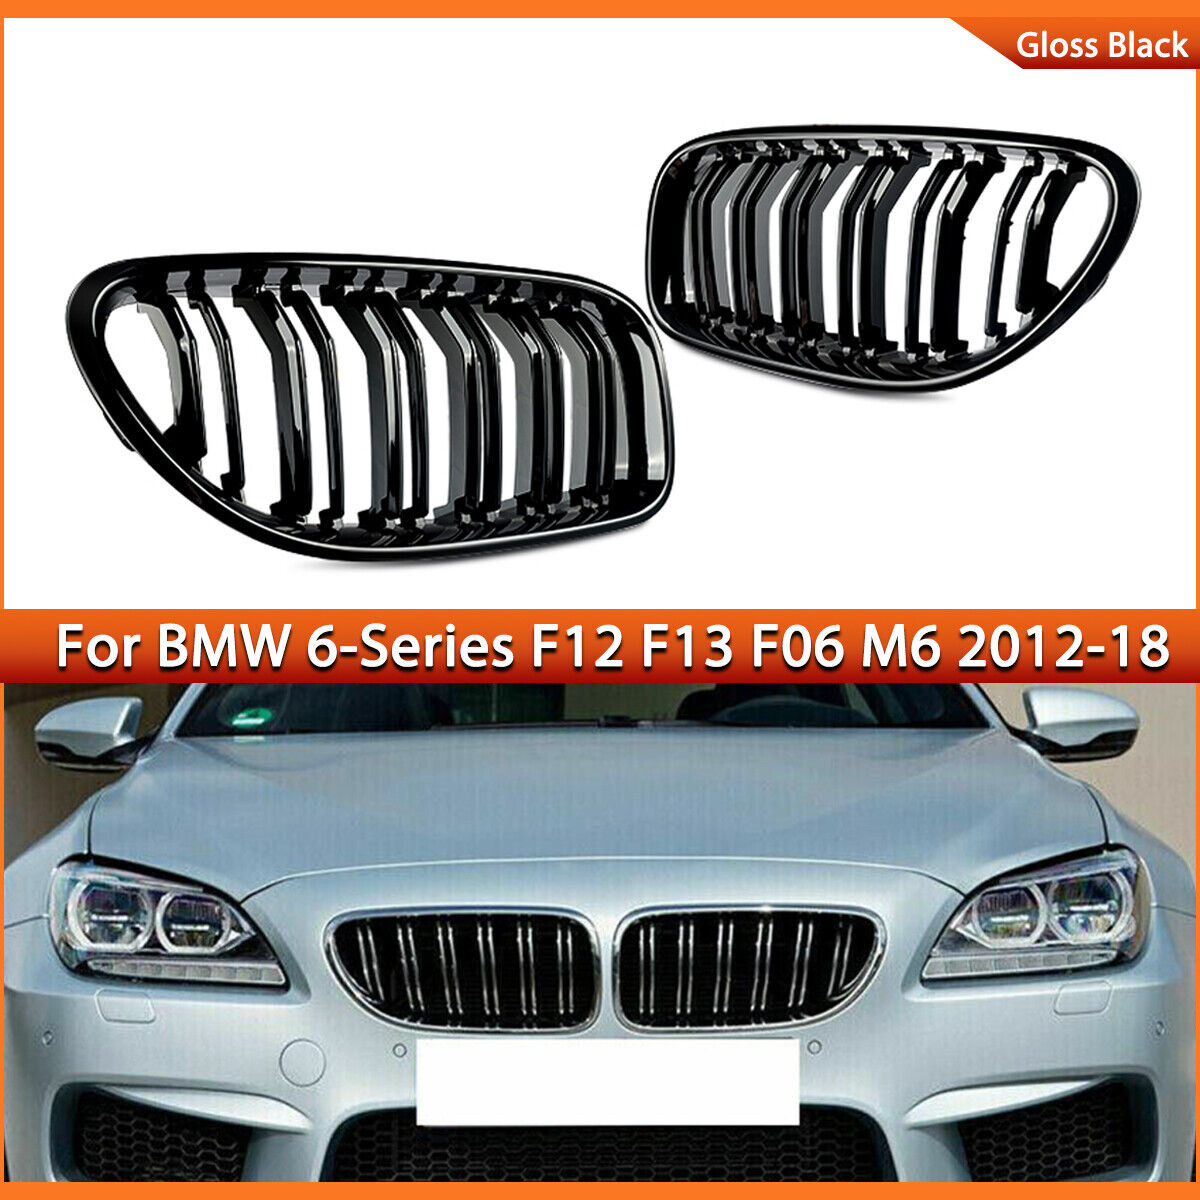 For 2012-2018 BMW F06 F12 F13 M6 650i 640i Front Kidney Grille Grill Gloss Black